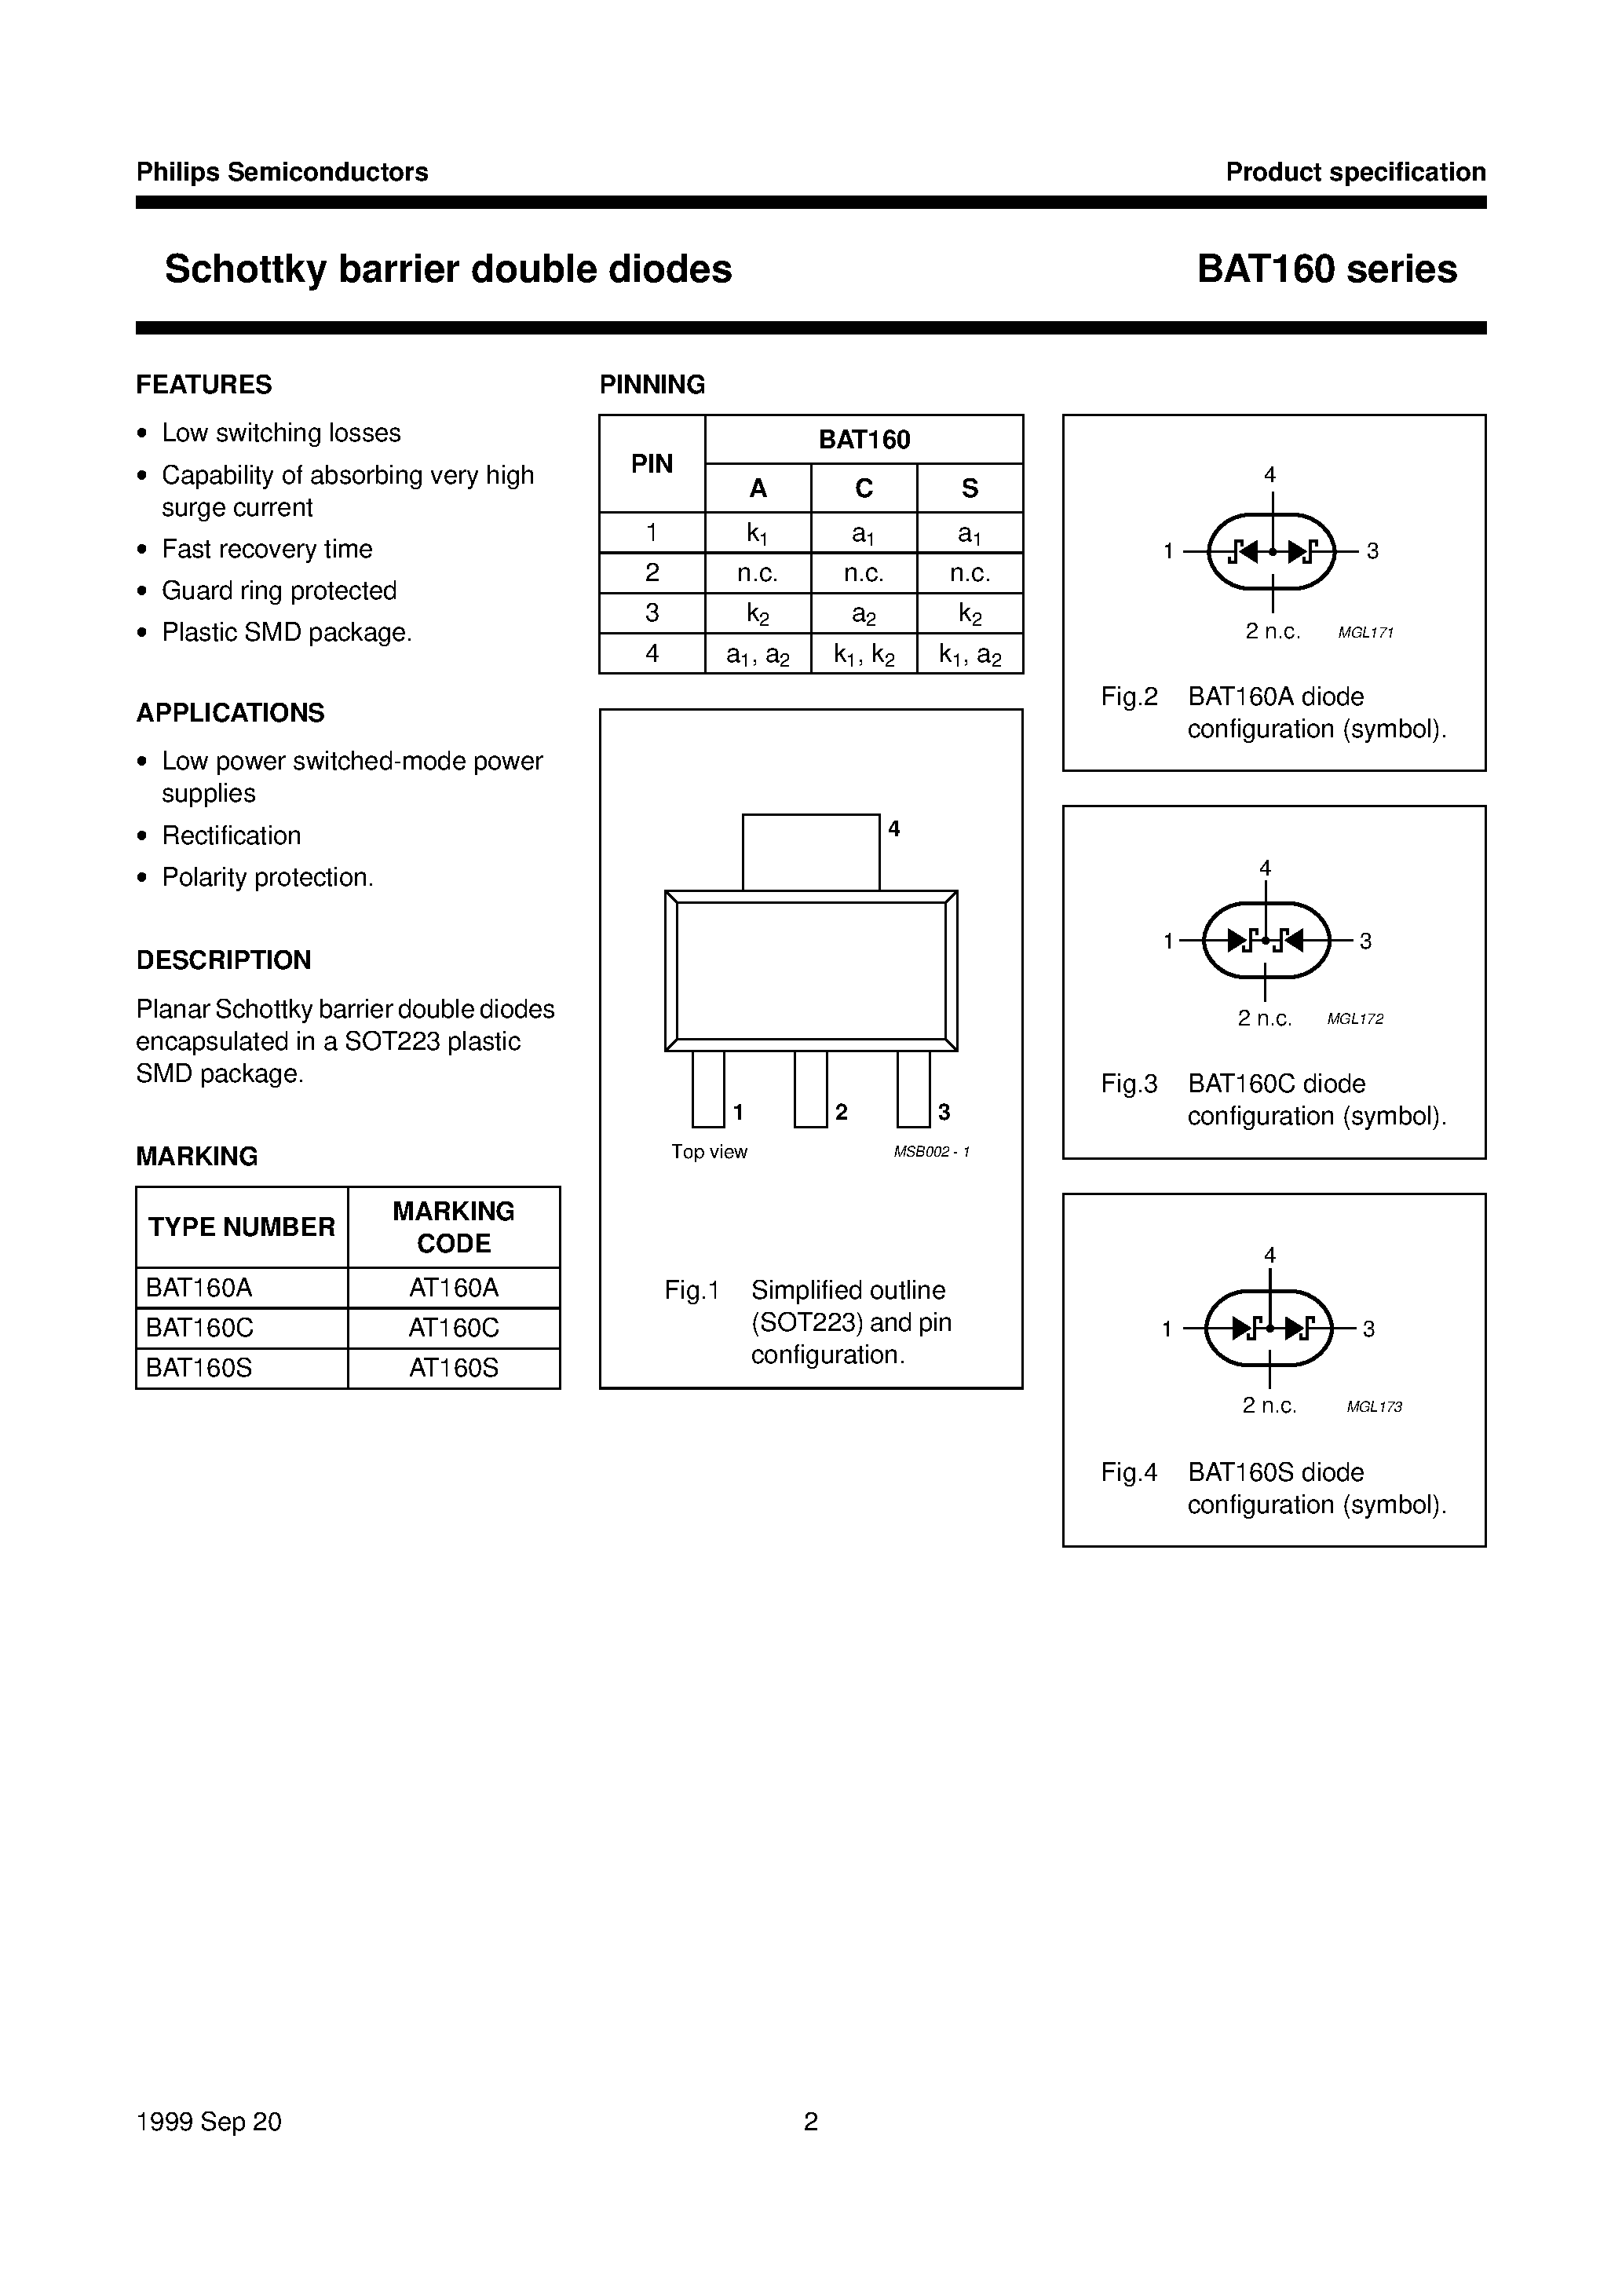 Datasheet BAT160S - Schottky barrier double diodes page 2